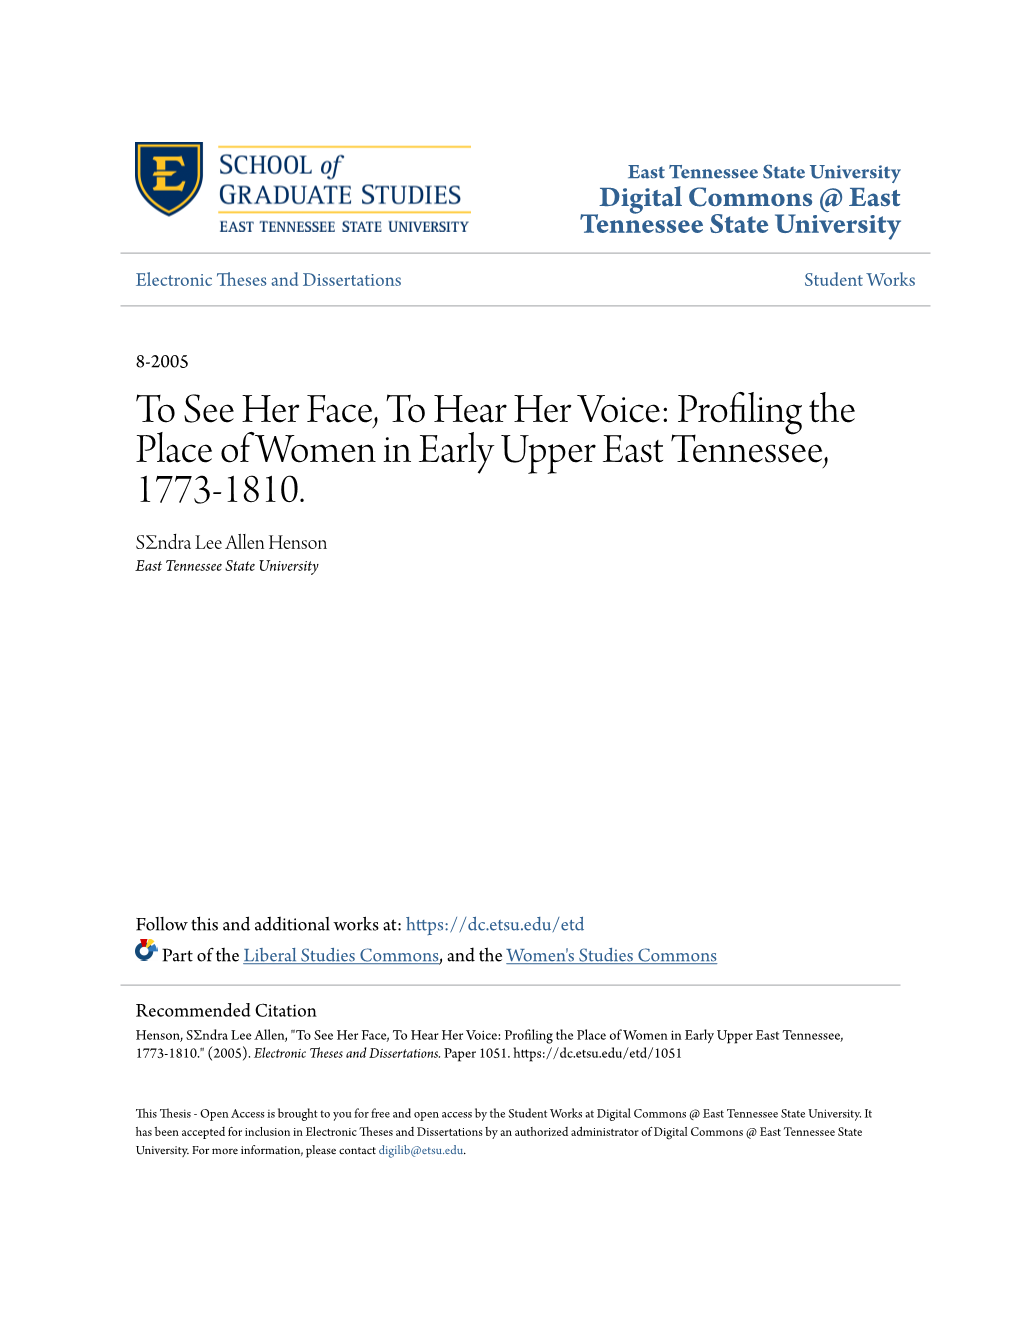 Profiling the Place of Women in Early Upper East Tennessee, 1773-1810. Sσndra Lee Allen Henson East Tennessee State University